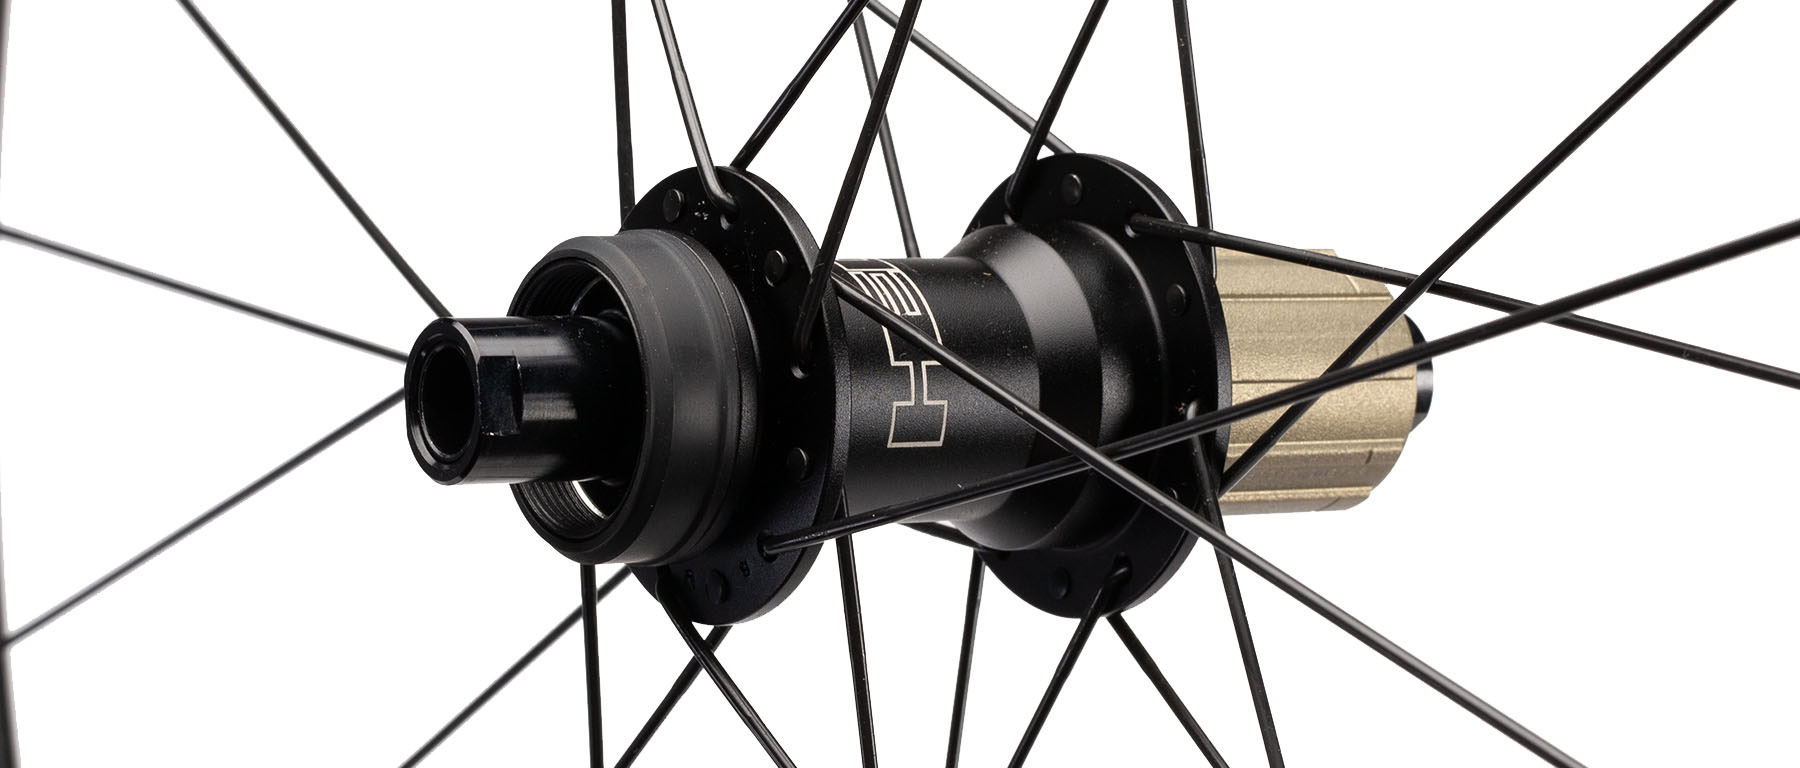 HED Ardennes Plus GP Disc Wheelset